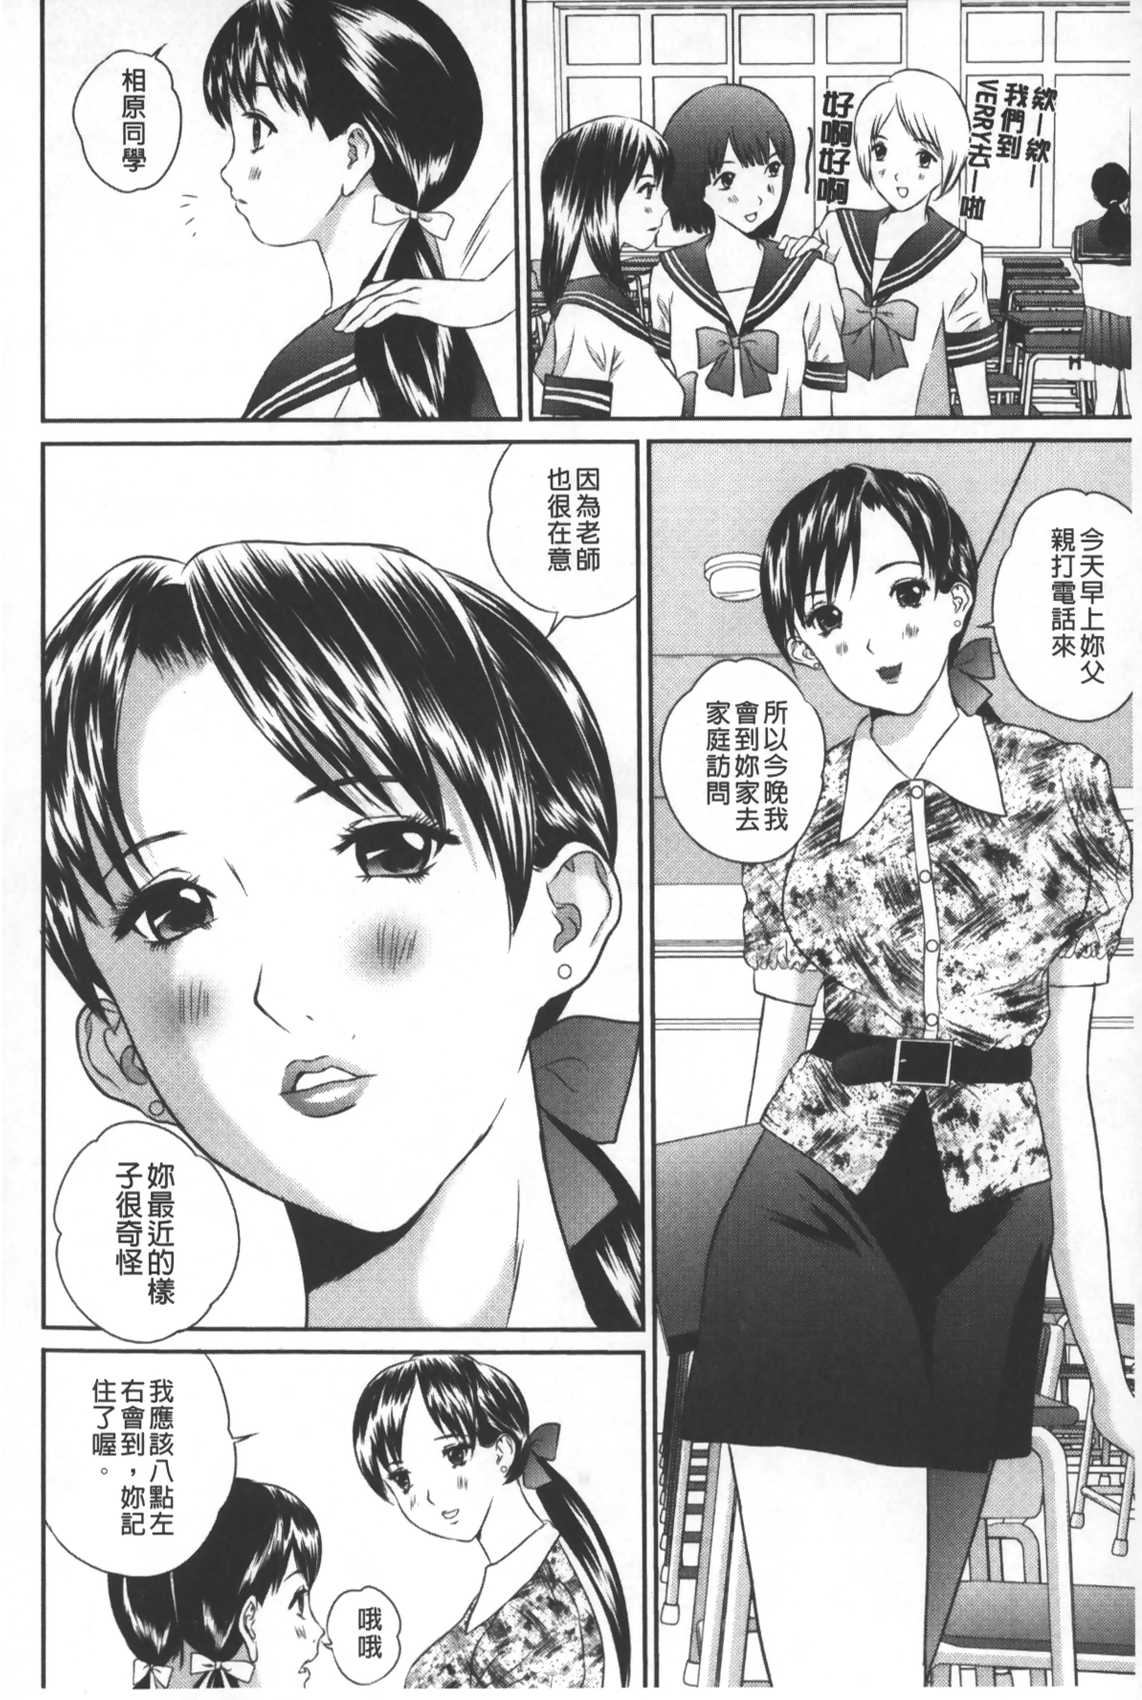 [Manzou] Tousatsu Collector | 盜拍題材精選集 [Chinese] page 43 full